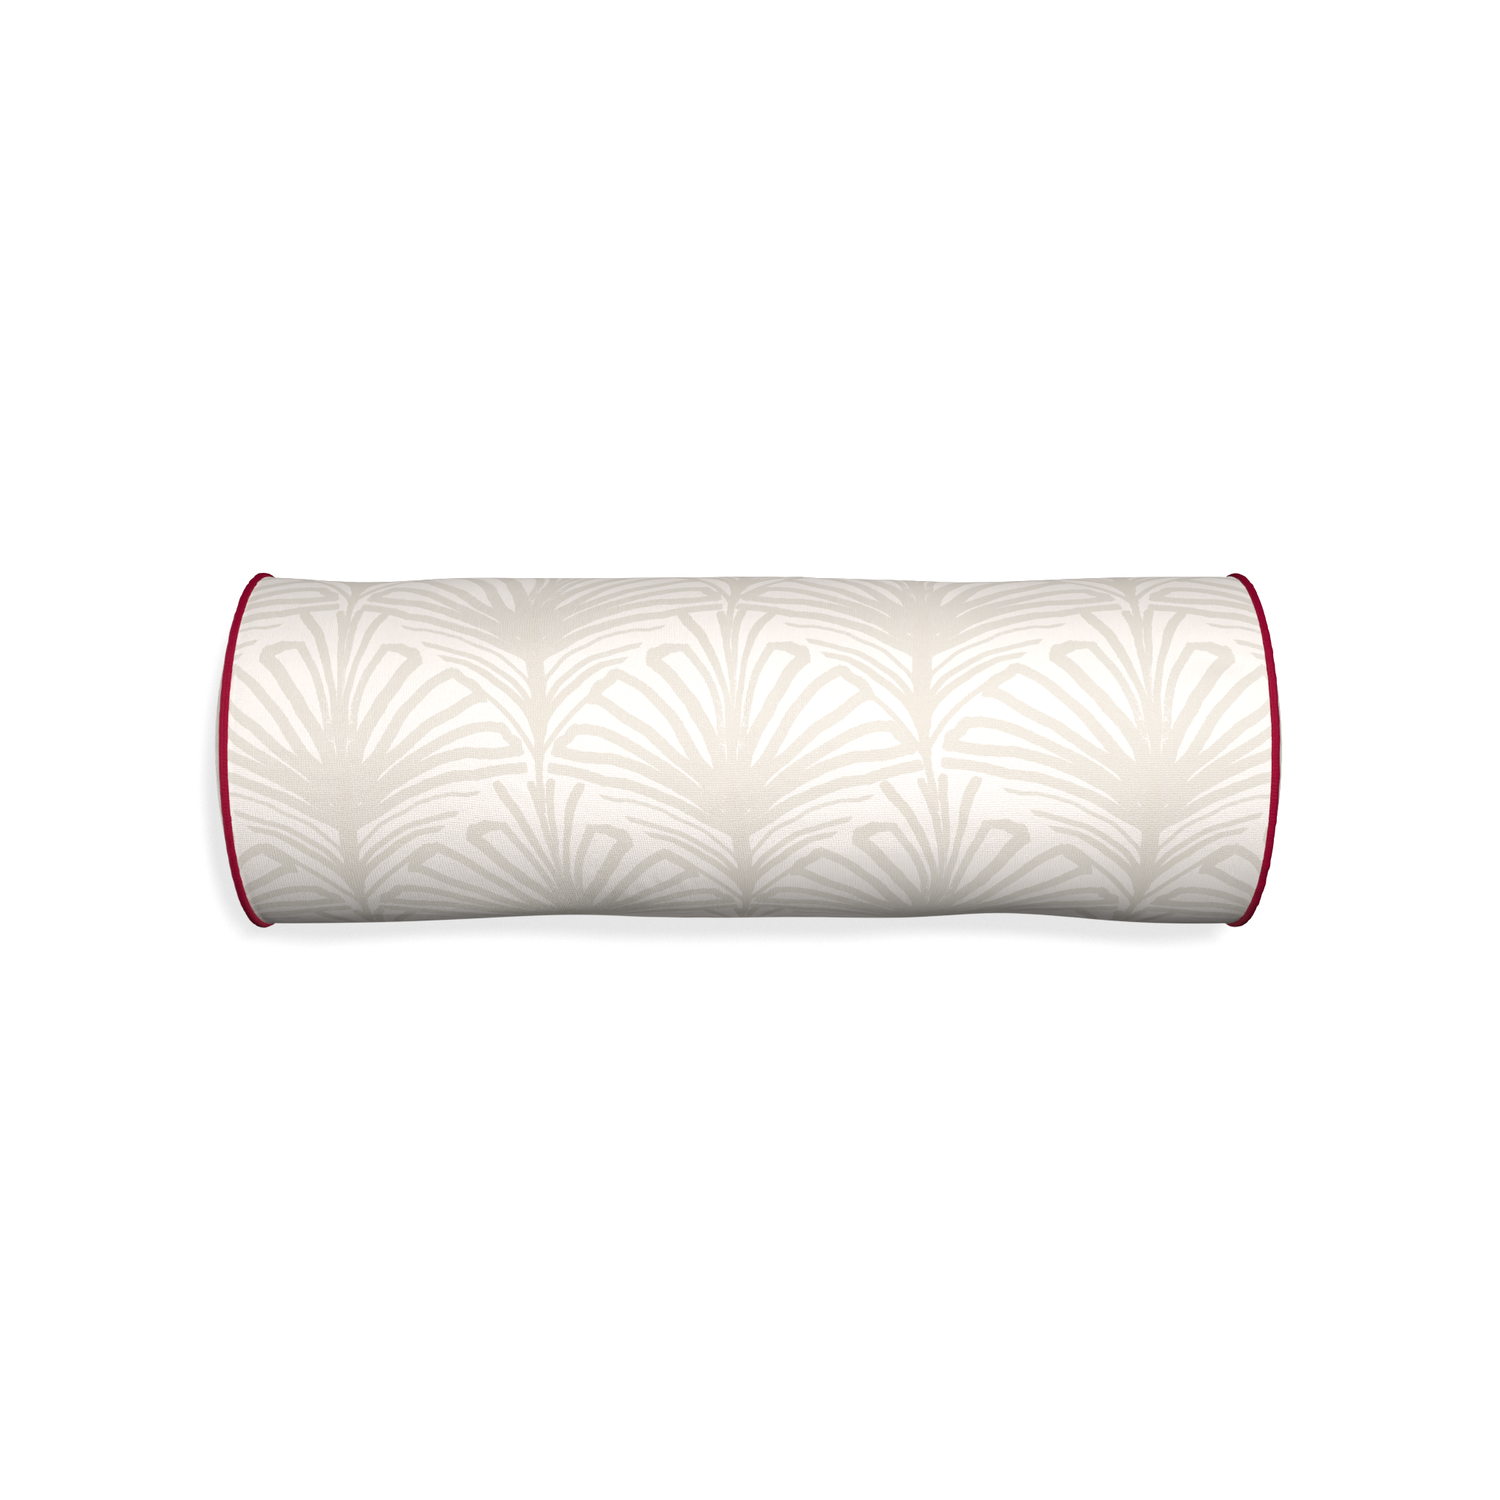 Bolster suzy sand custom pillow with raspberry piping on white background